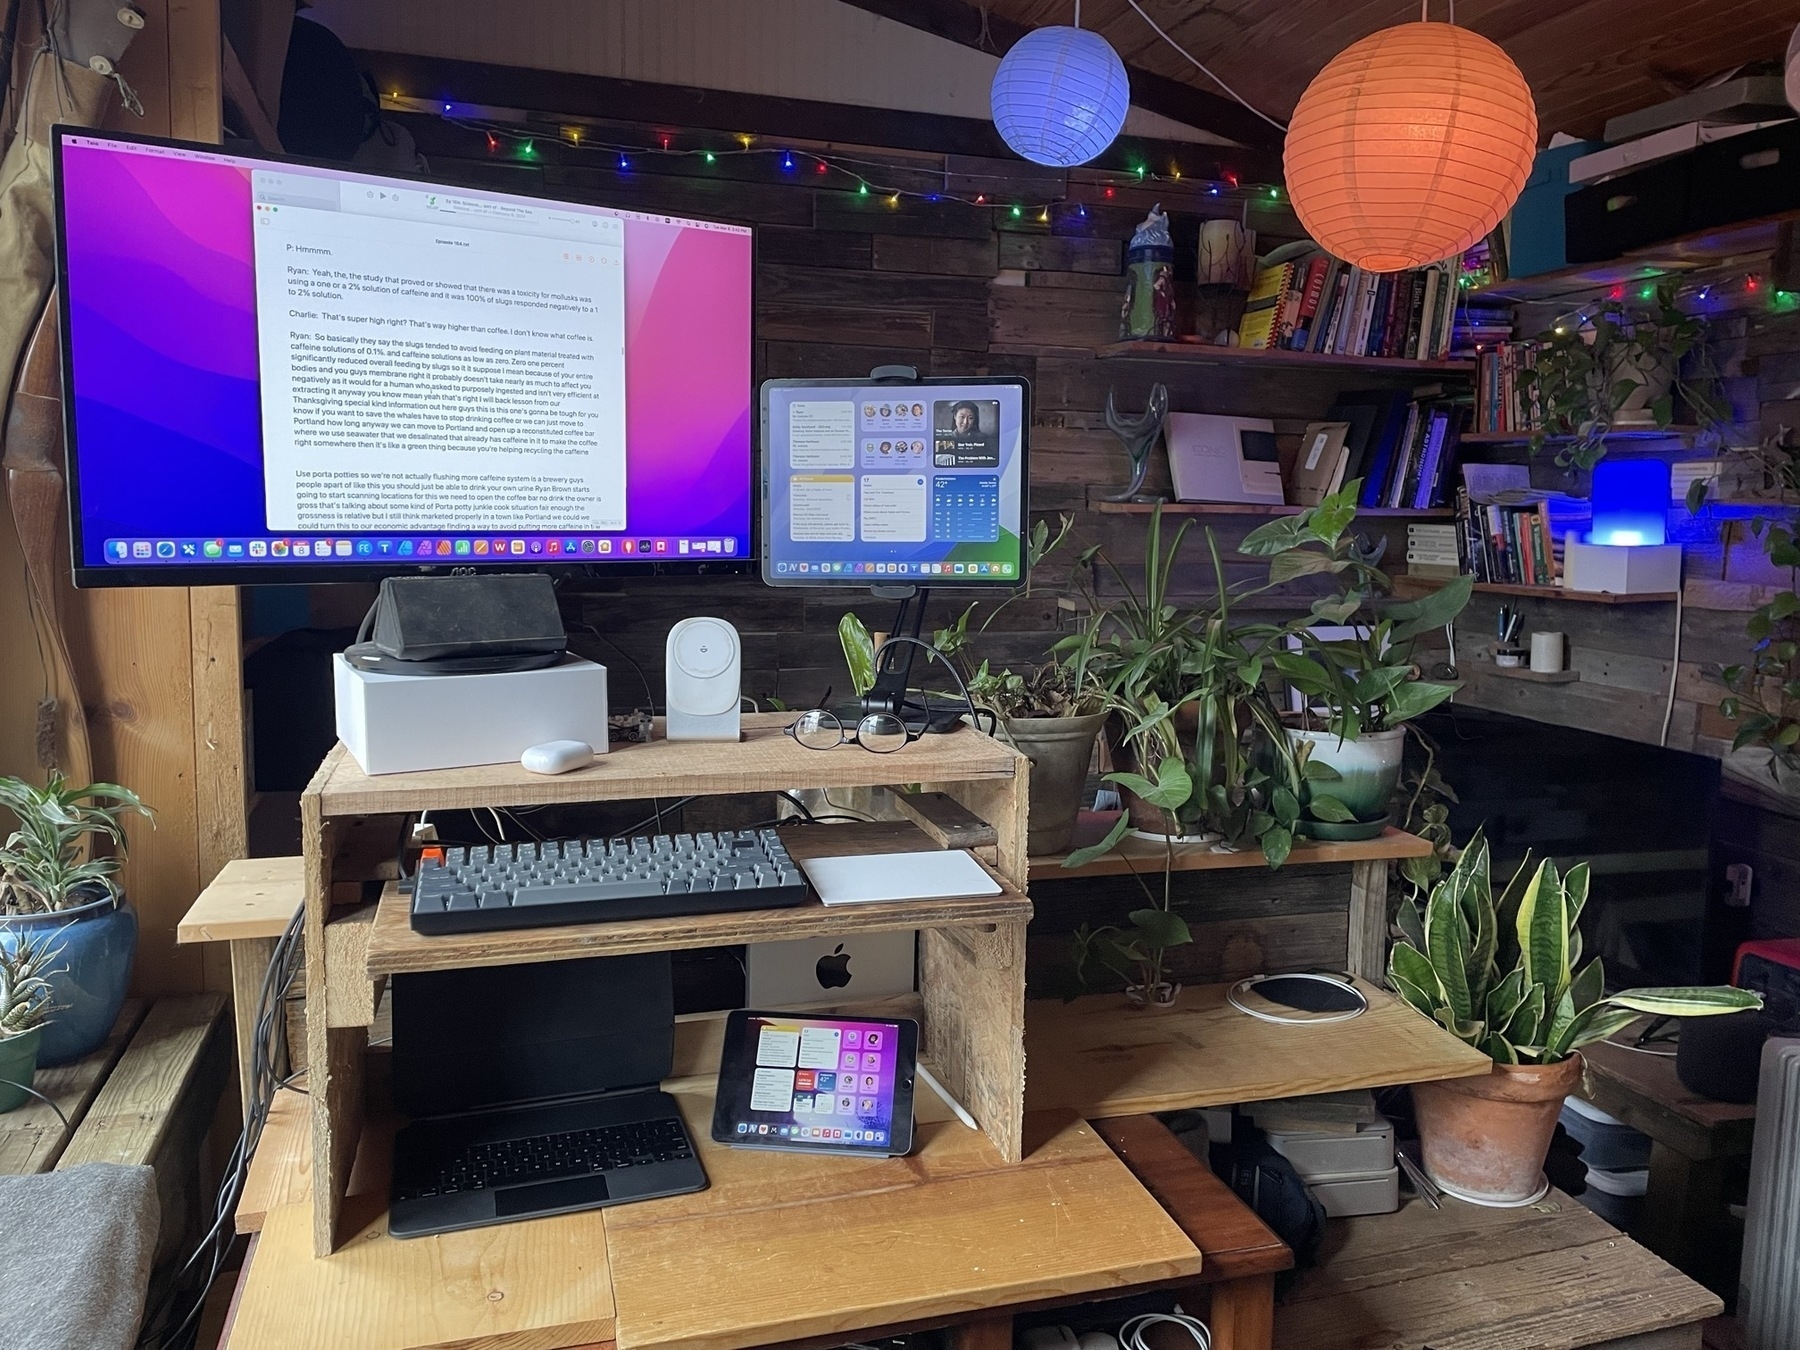 A standing desk has been improvised with a home built shelf on a desk. On the top shelf is a display attached to a Mac Mini. An iPad in a stand is to the right of the monitor. A keyboard and trackpad are on a second shelf below the top. Below that on the desk sits a smaller iPad.